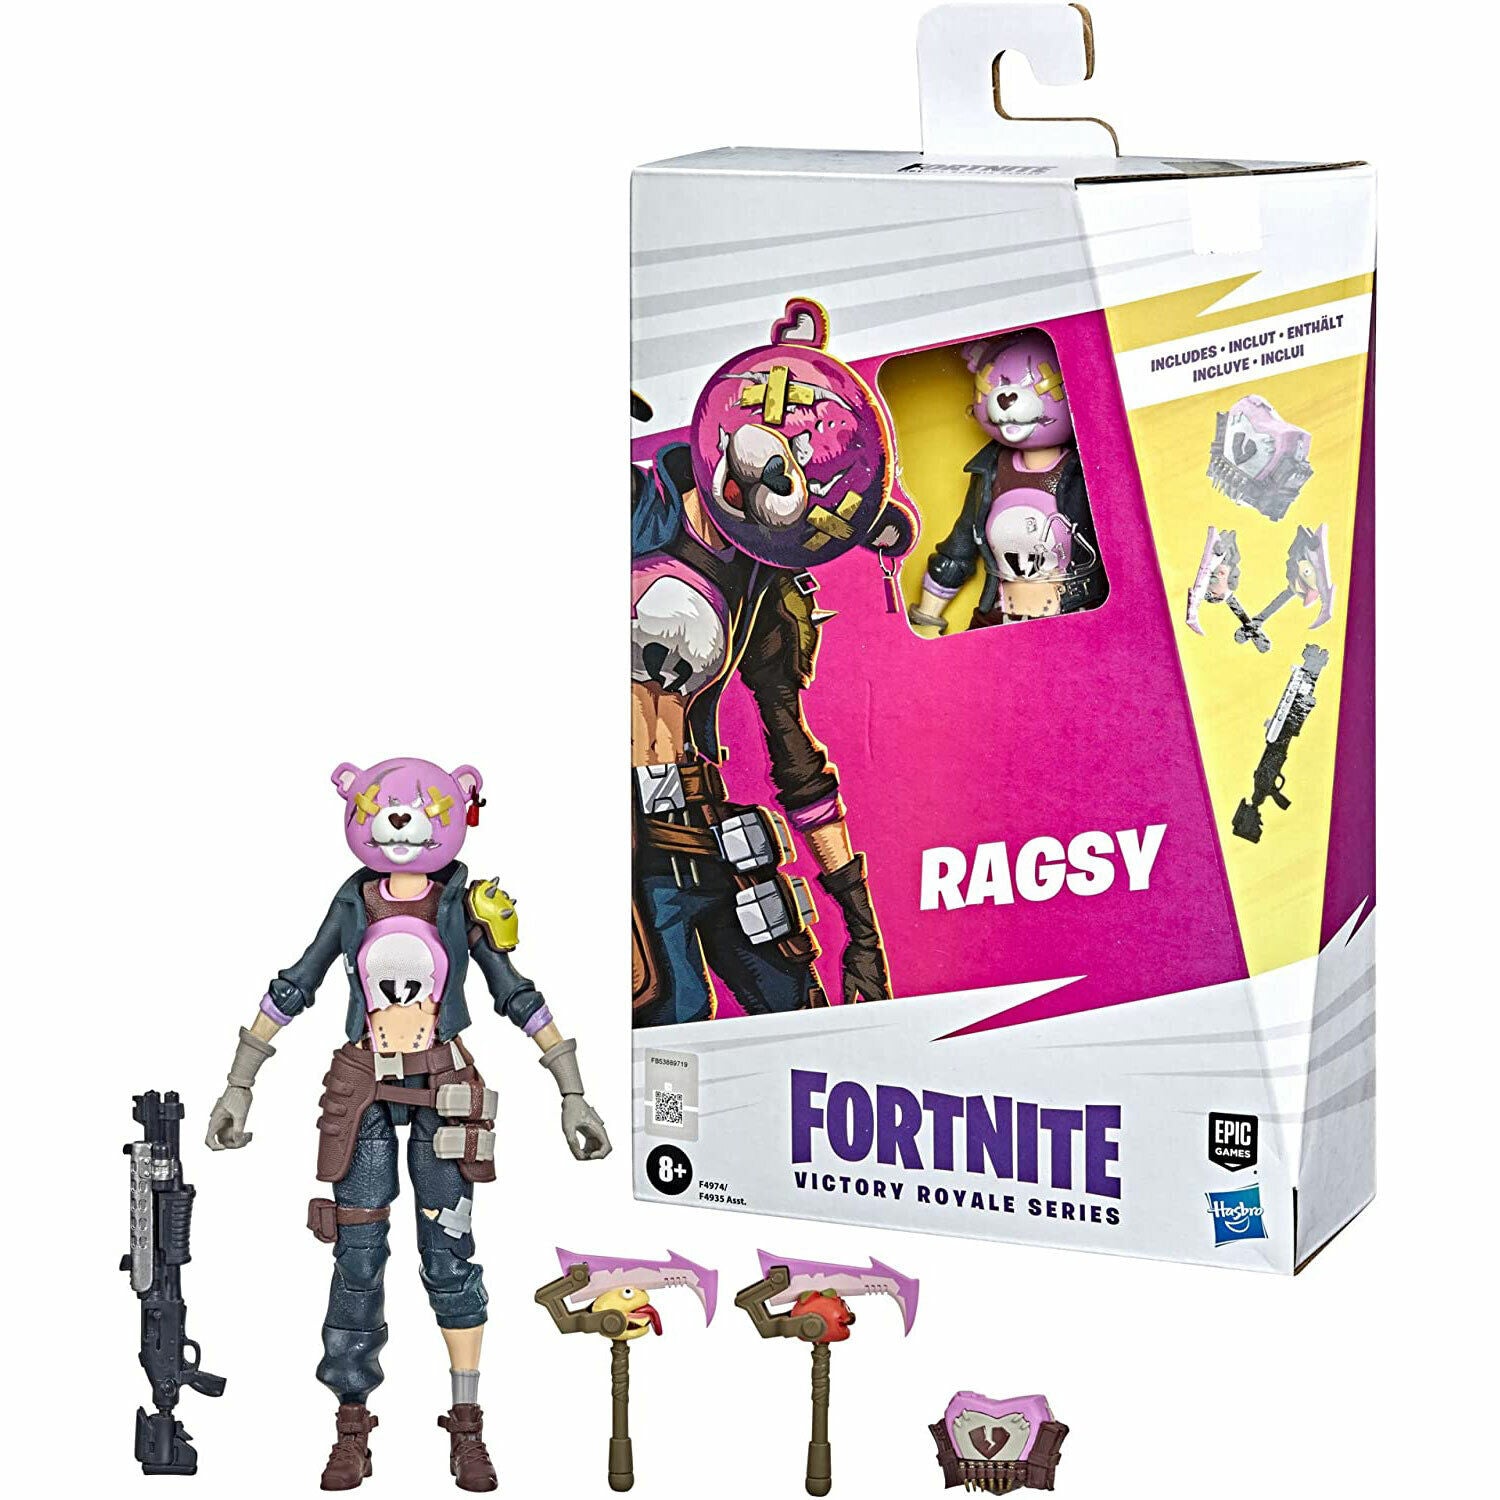 "Fortnite Victory Royale Ragsy 6" Action Figure - Brand New"